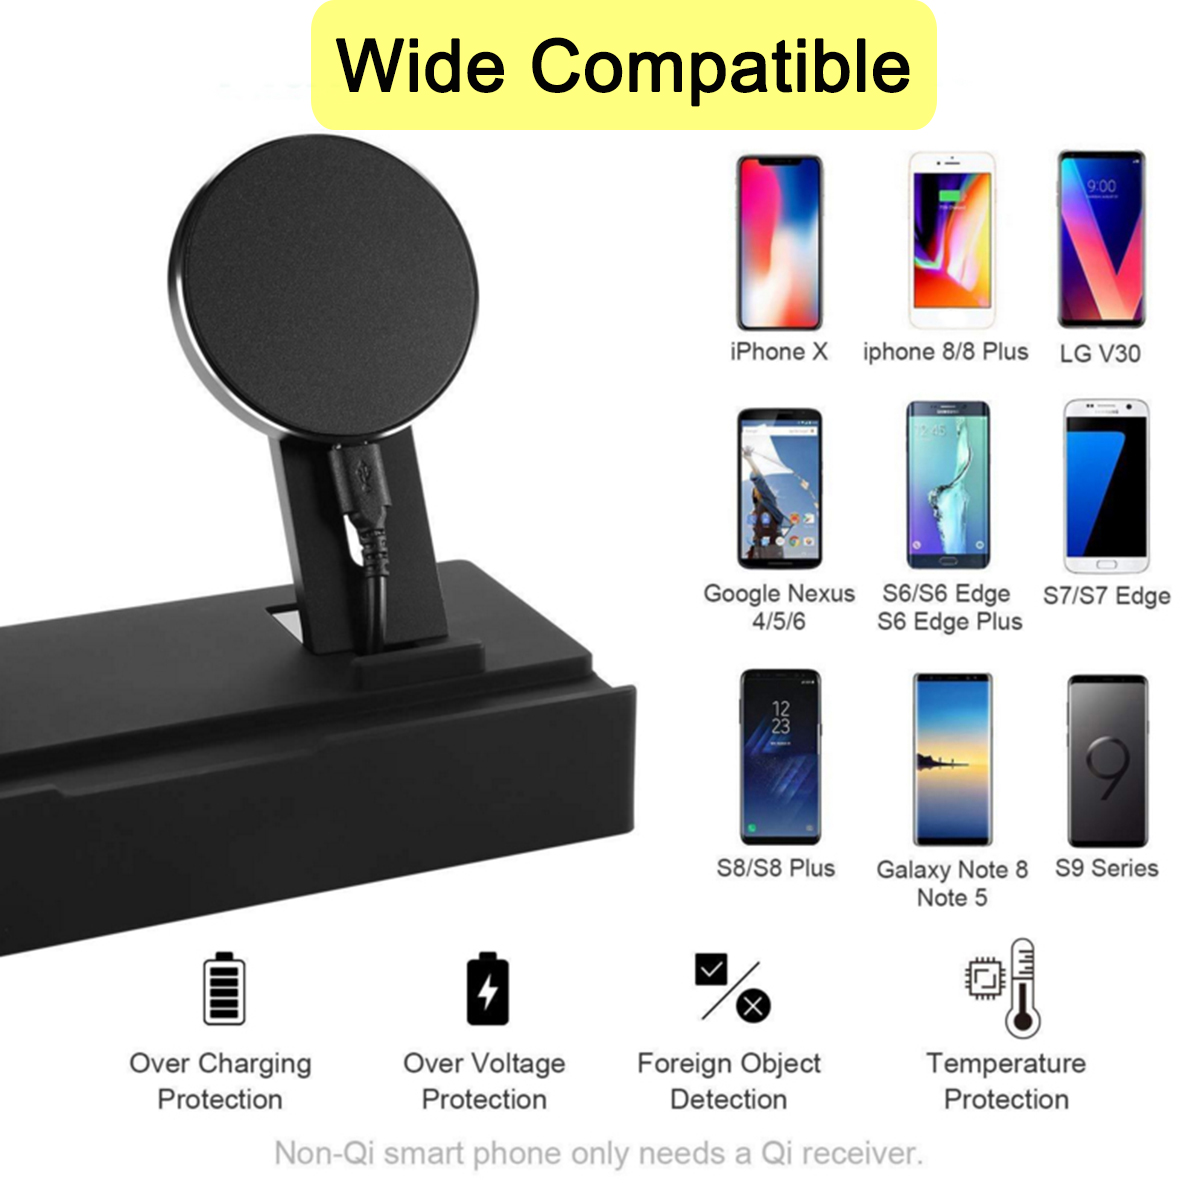 8-In-1-Qi-Wireless-Charger-Fast-Charging-Phone-Holder-For-iPhoneSamsungHuaweiiPadApple-PencilApple-W-1419781-5